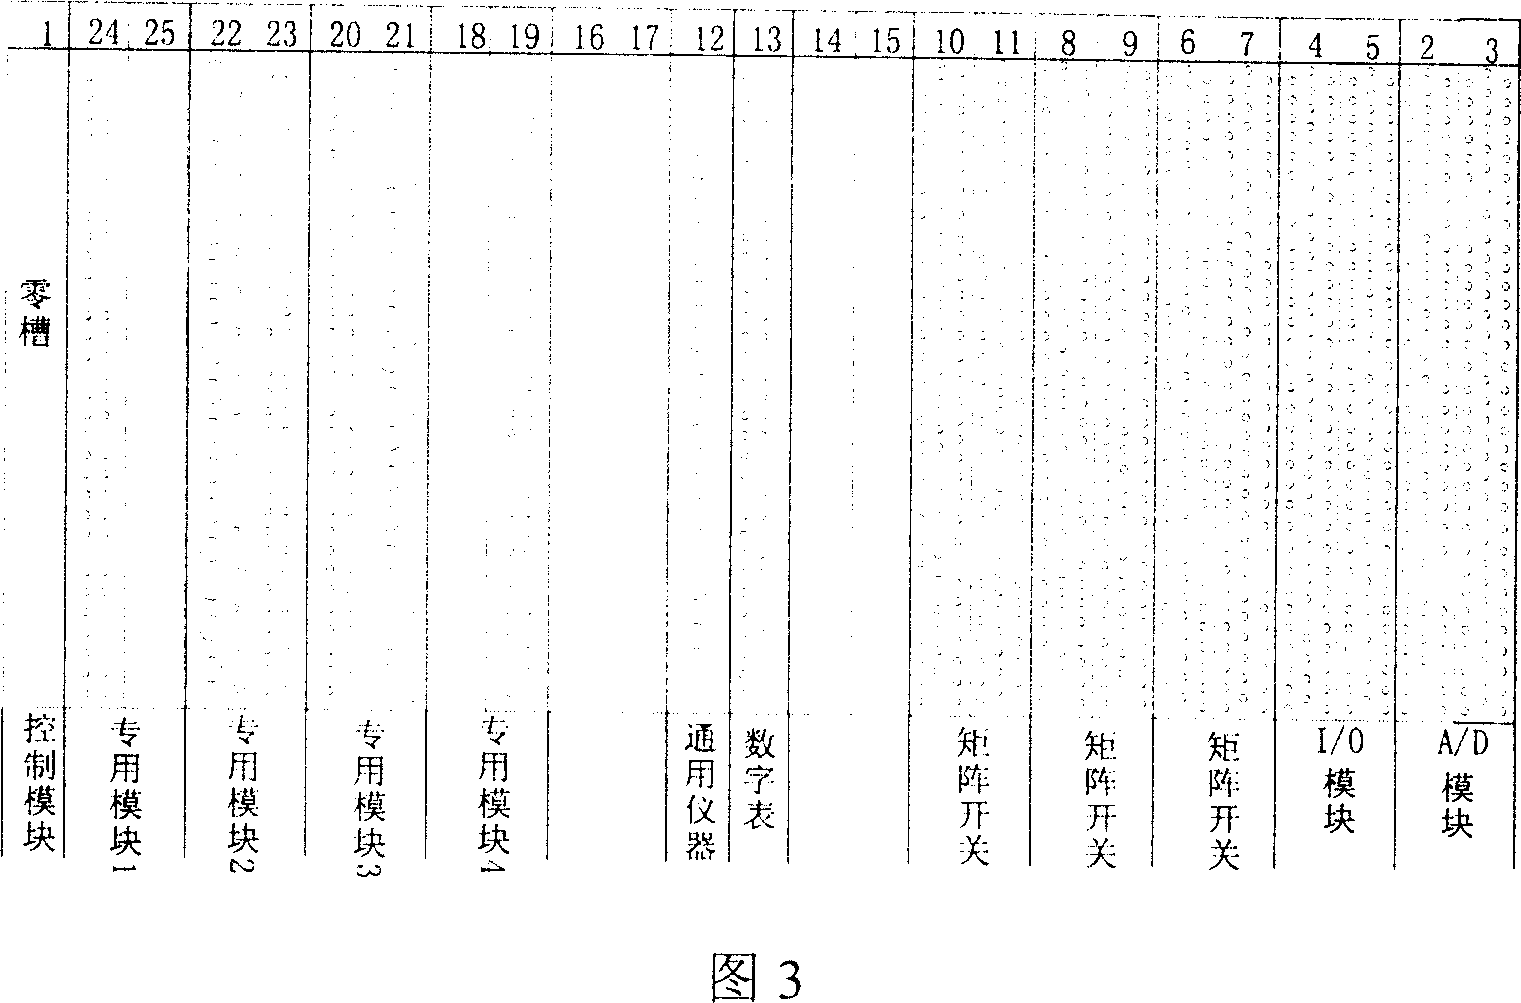 Universal testing interface device and its universal testing system